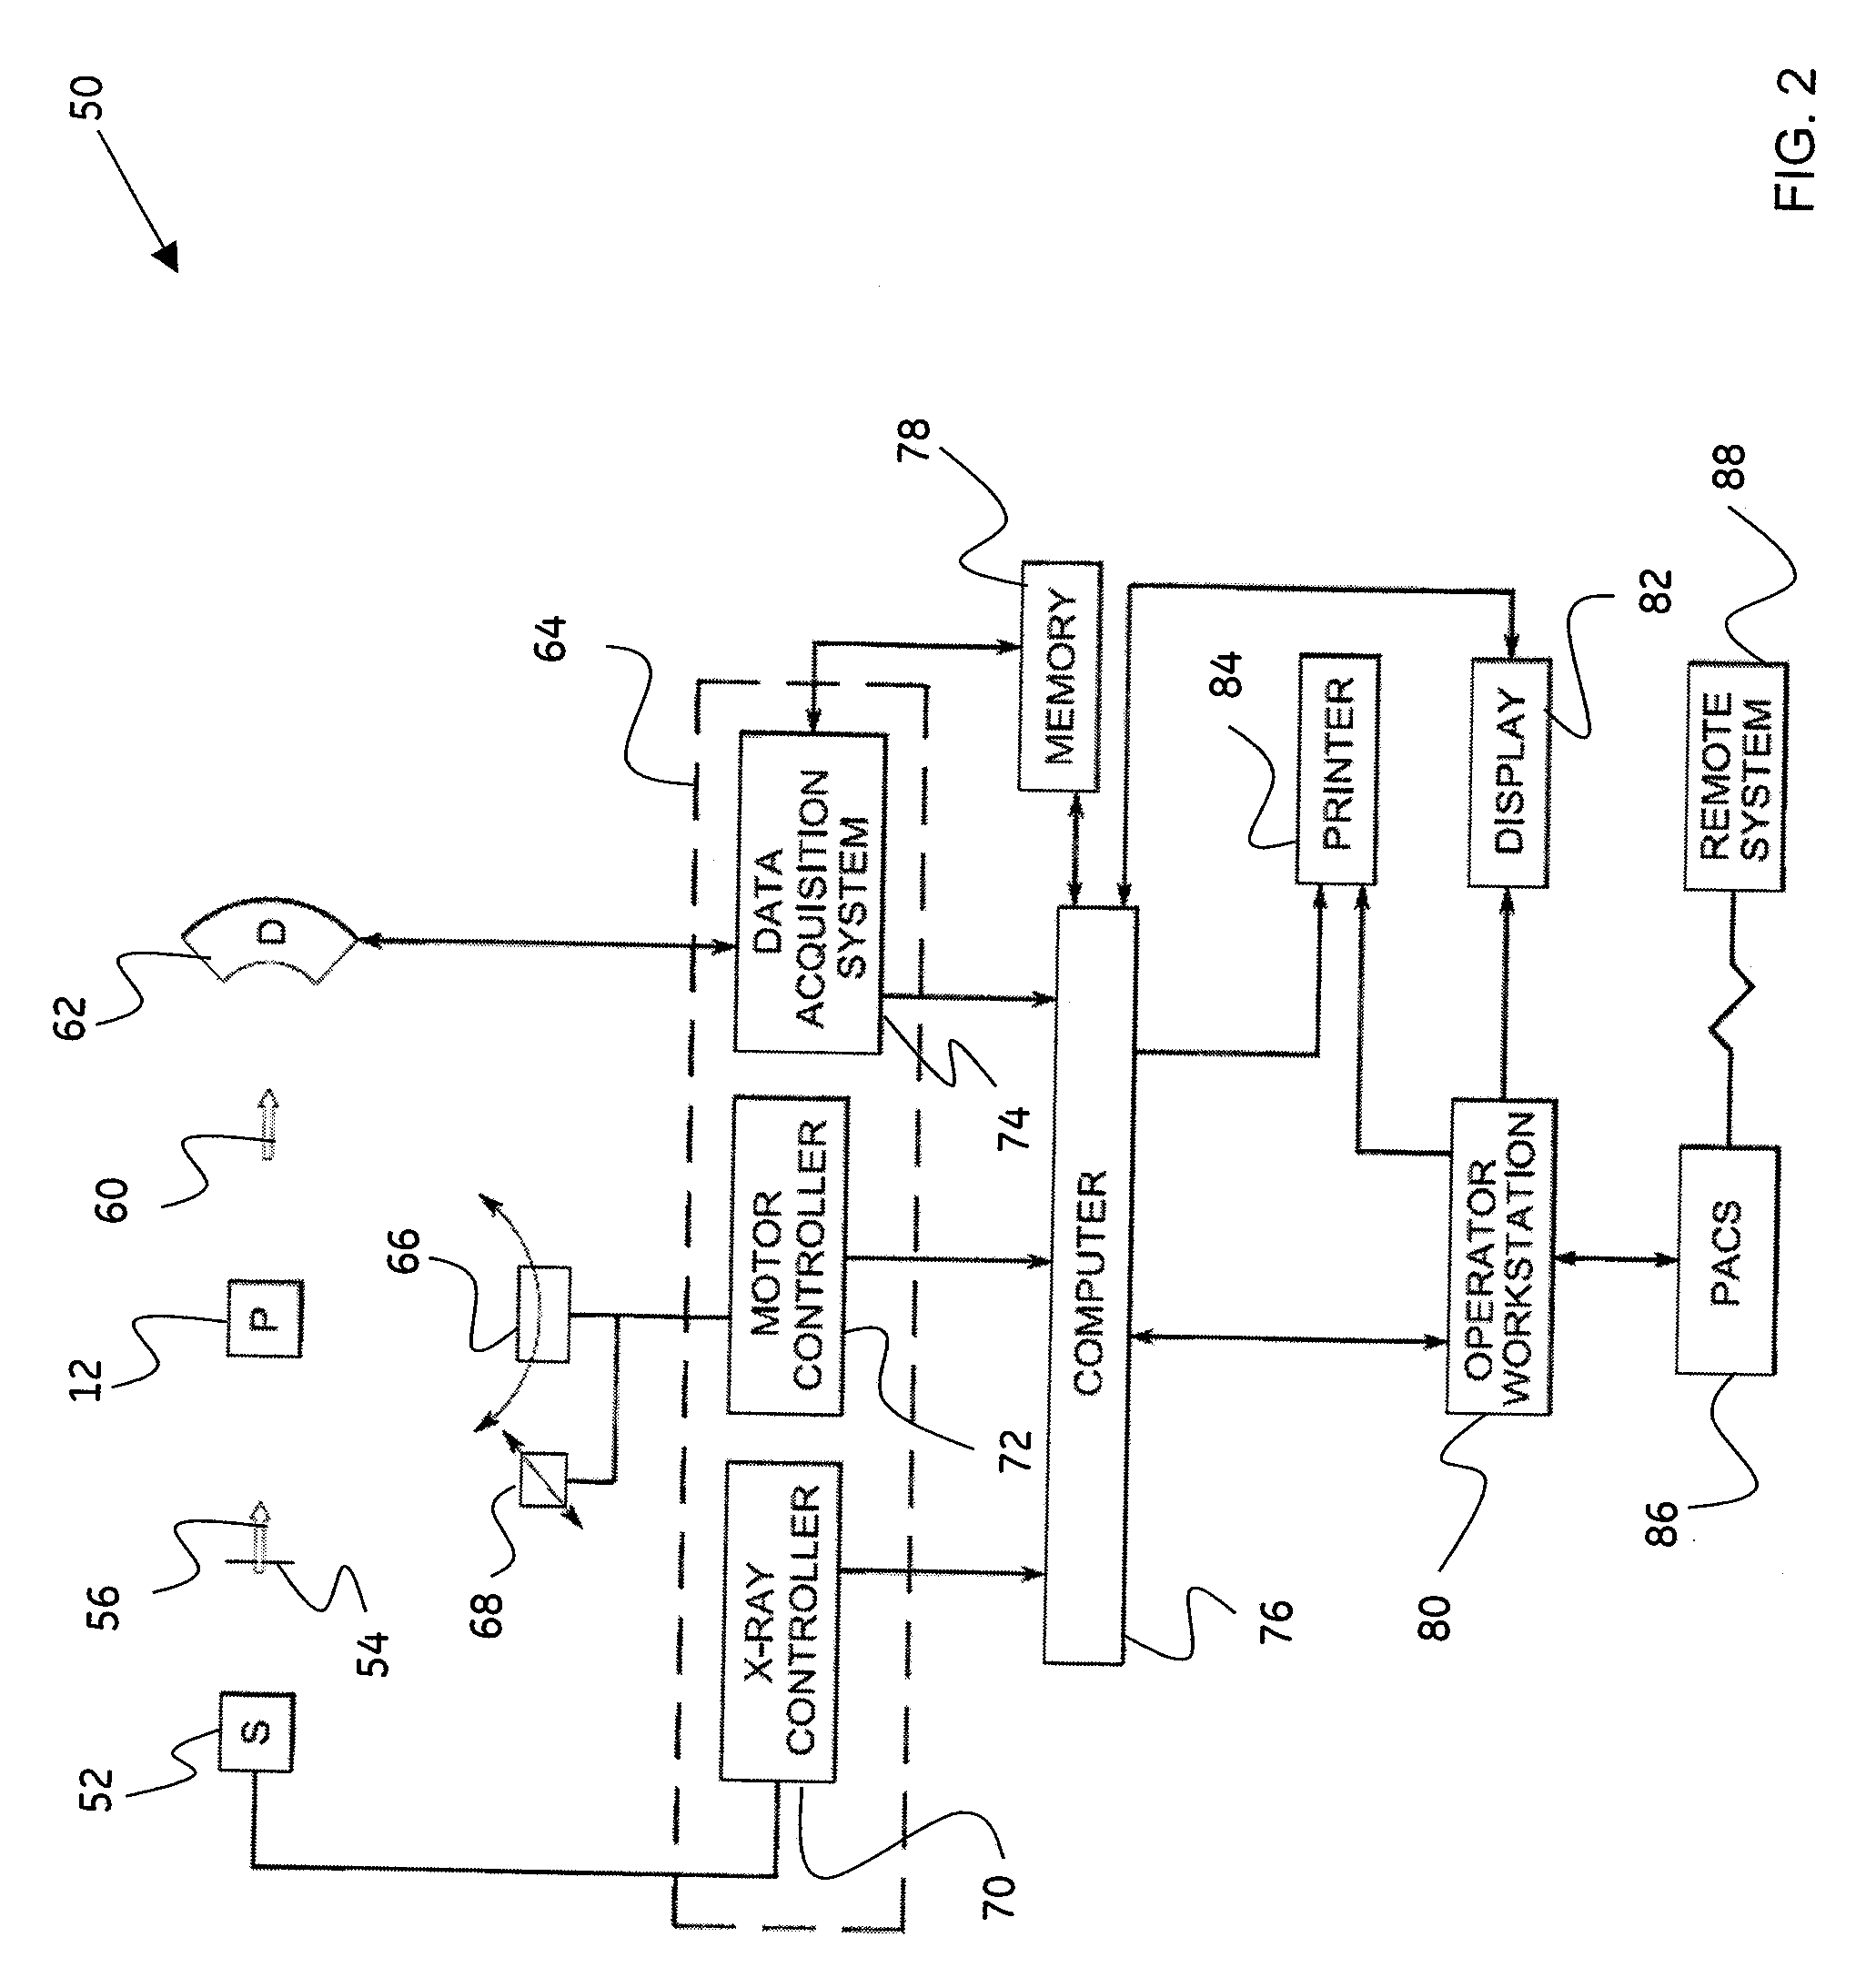 Method and system for detection of obstructions in vasculature